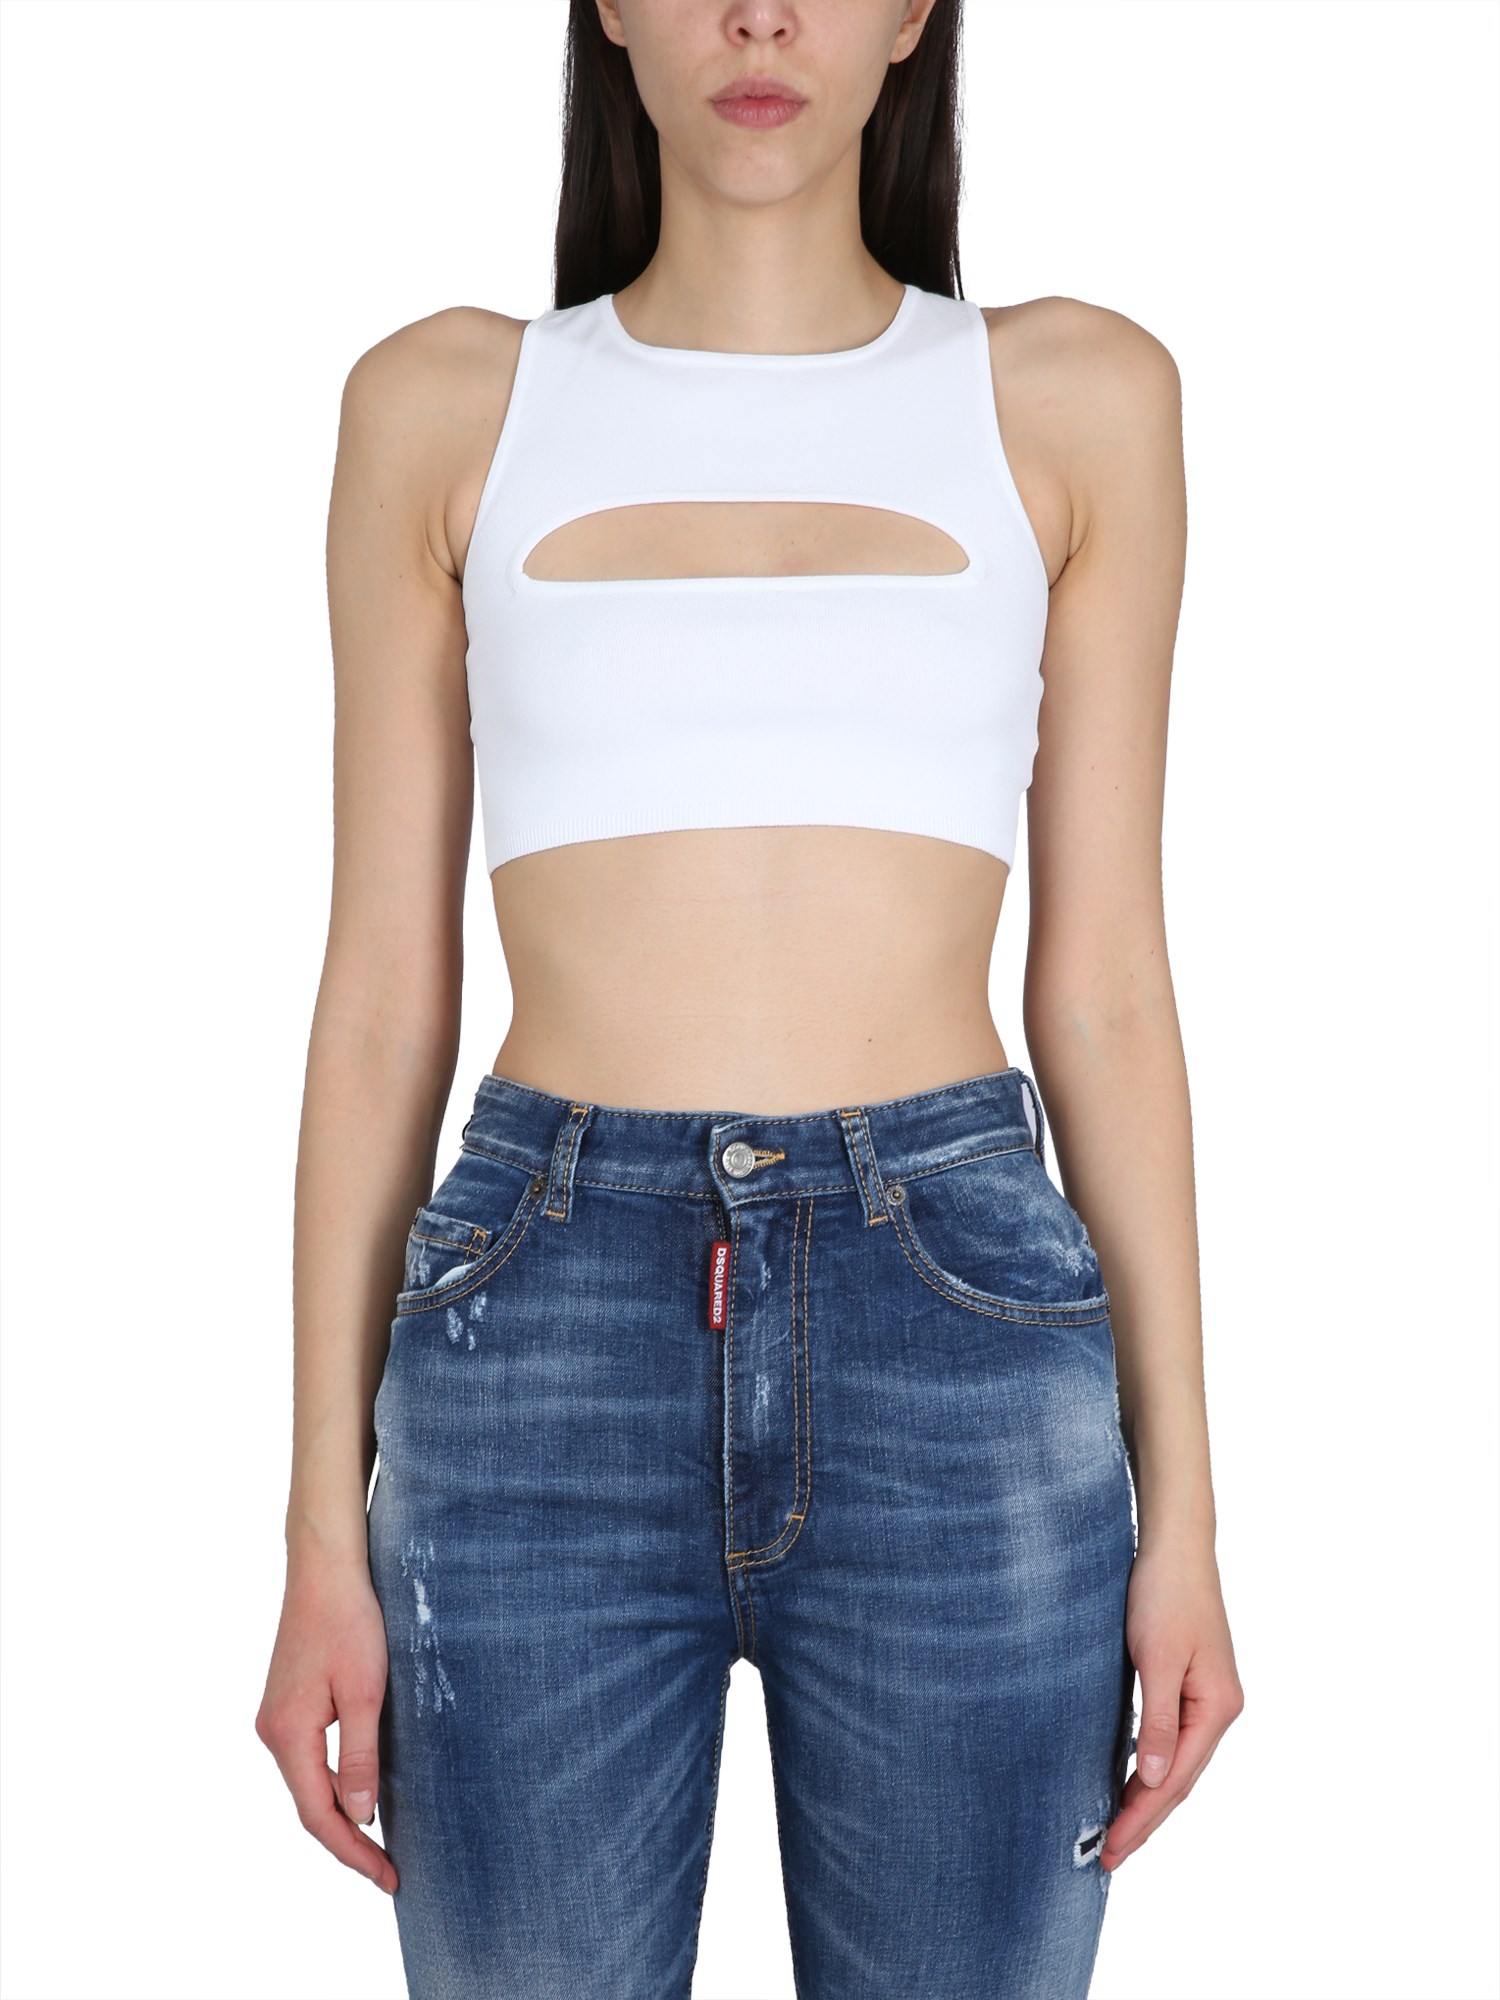 dsquared top cut out